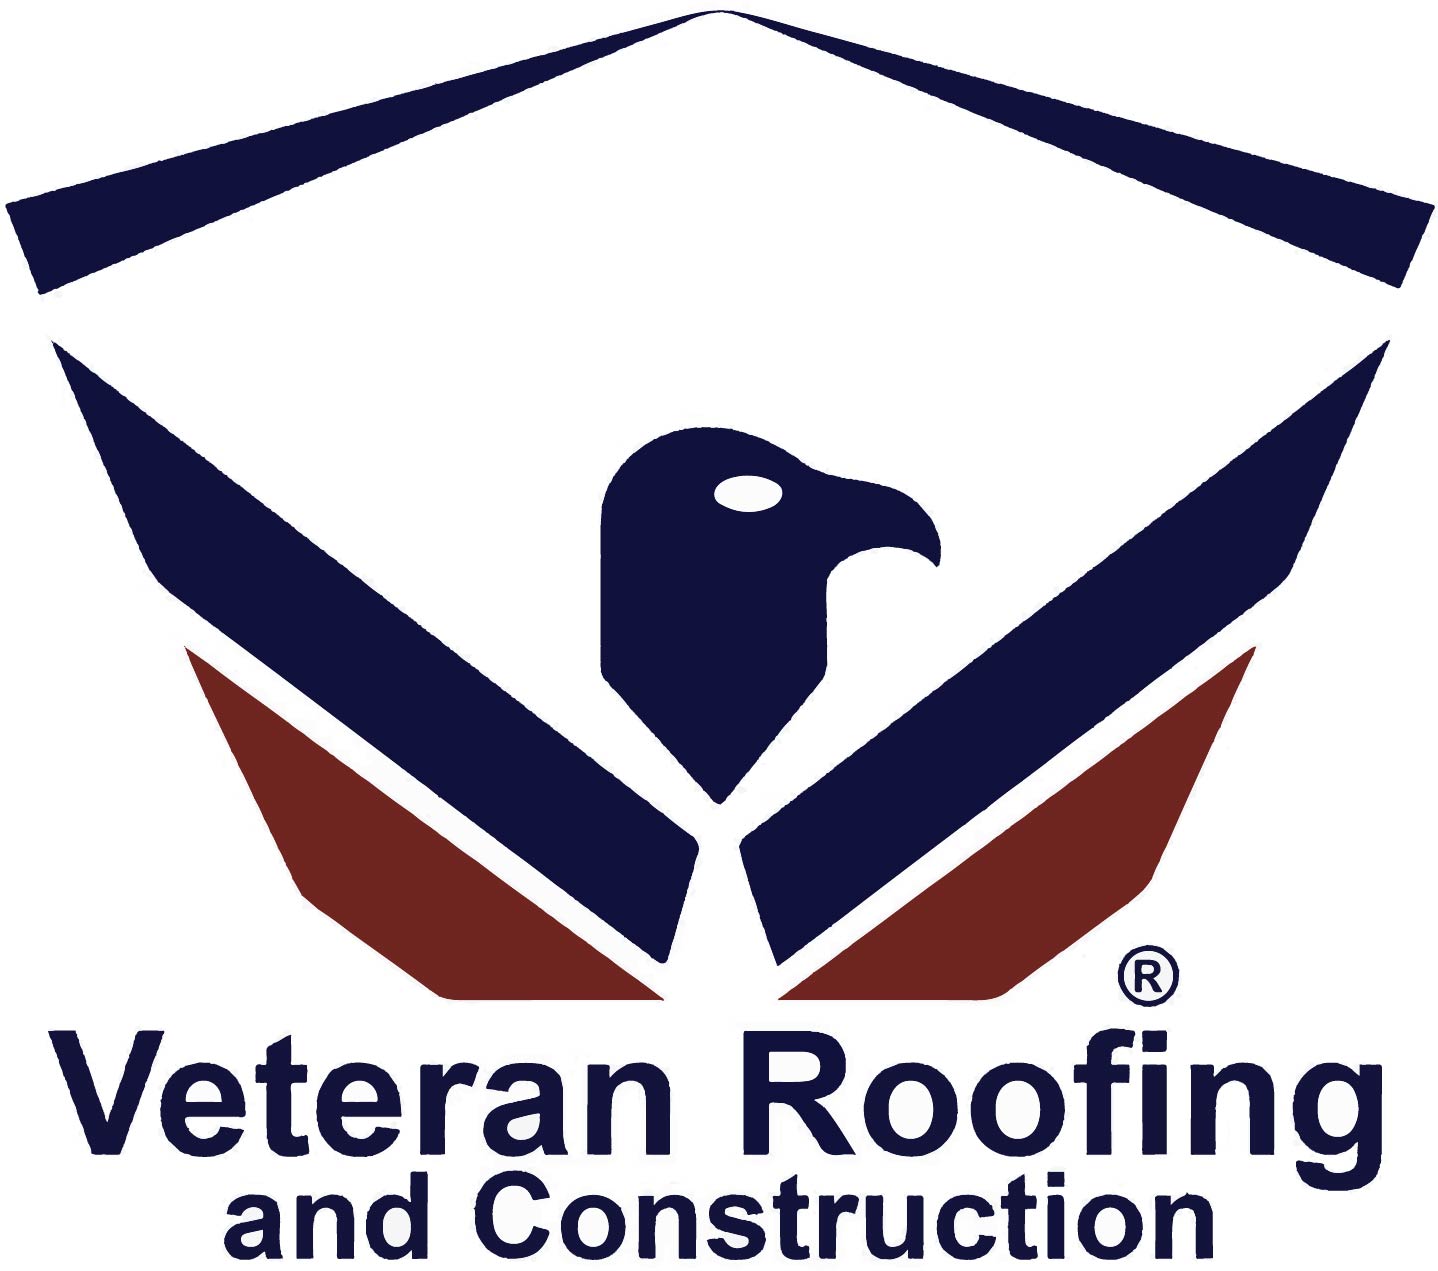 Veteran Roofing and Construction